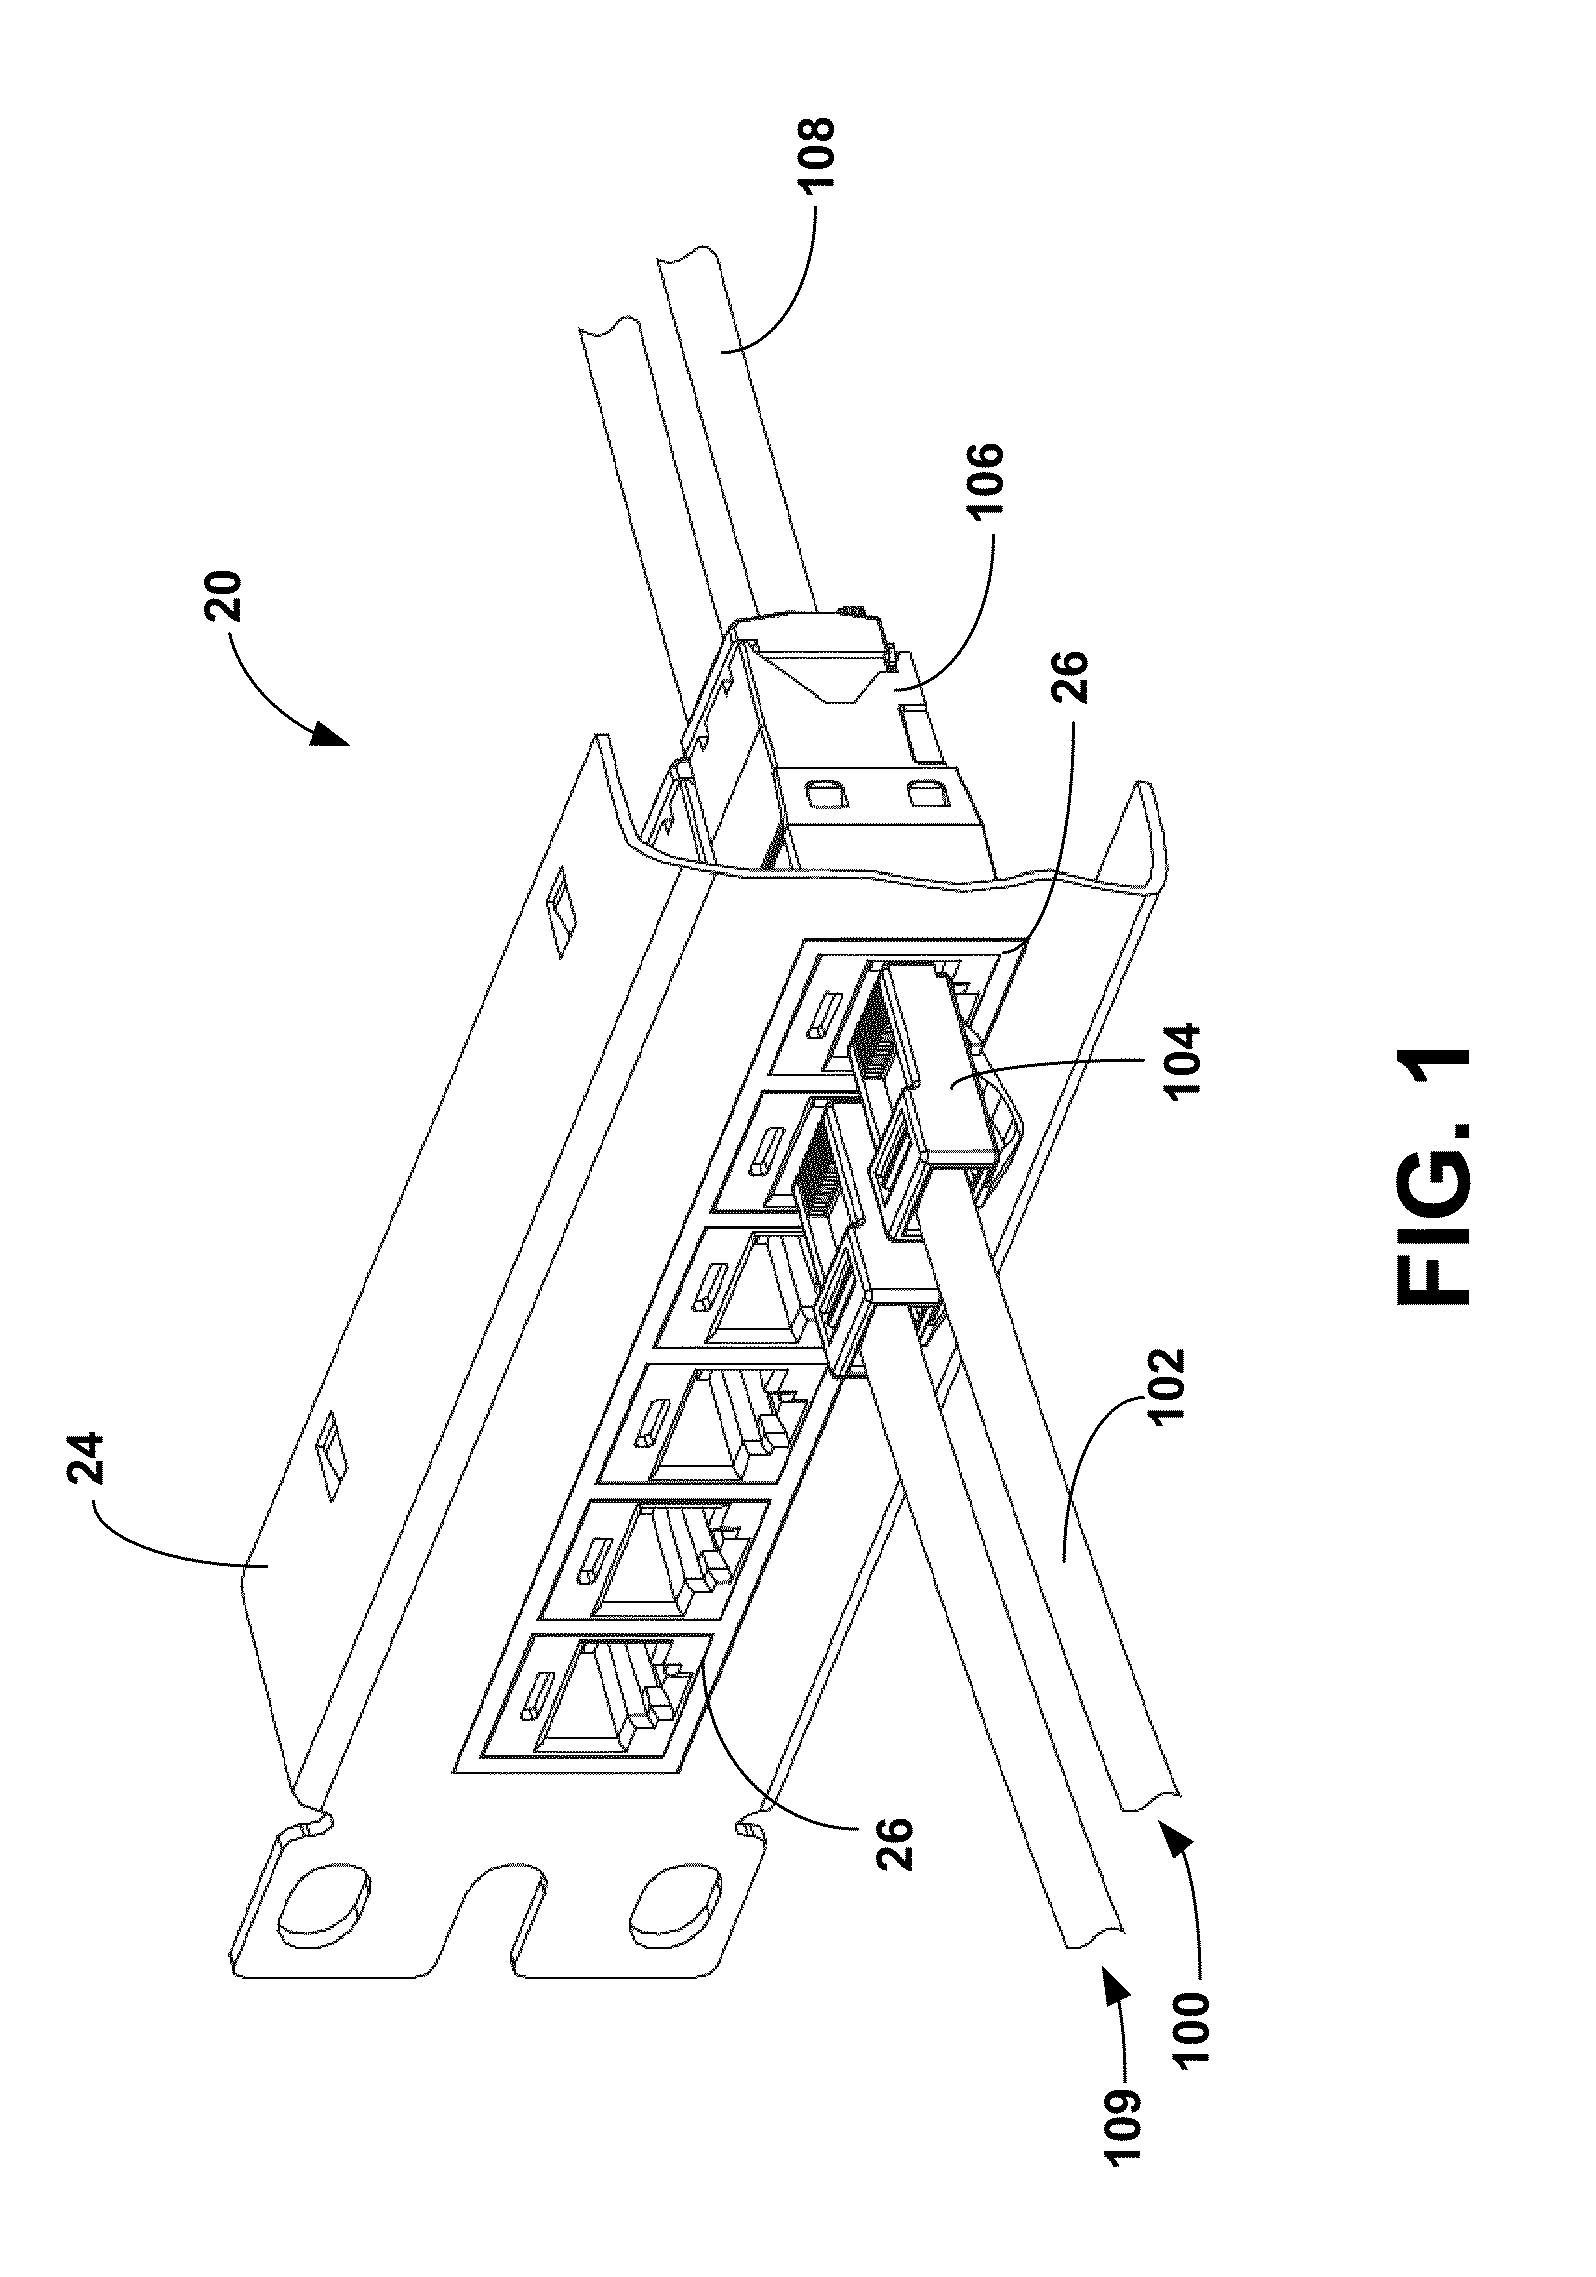 Communication connector with improved crosstalk compensation